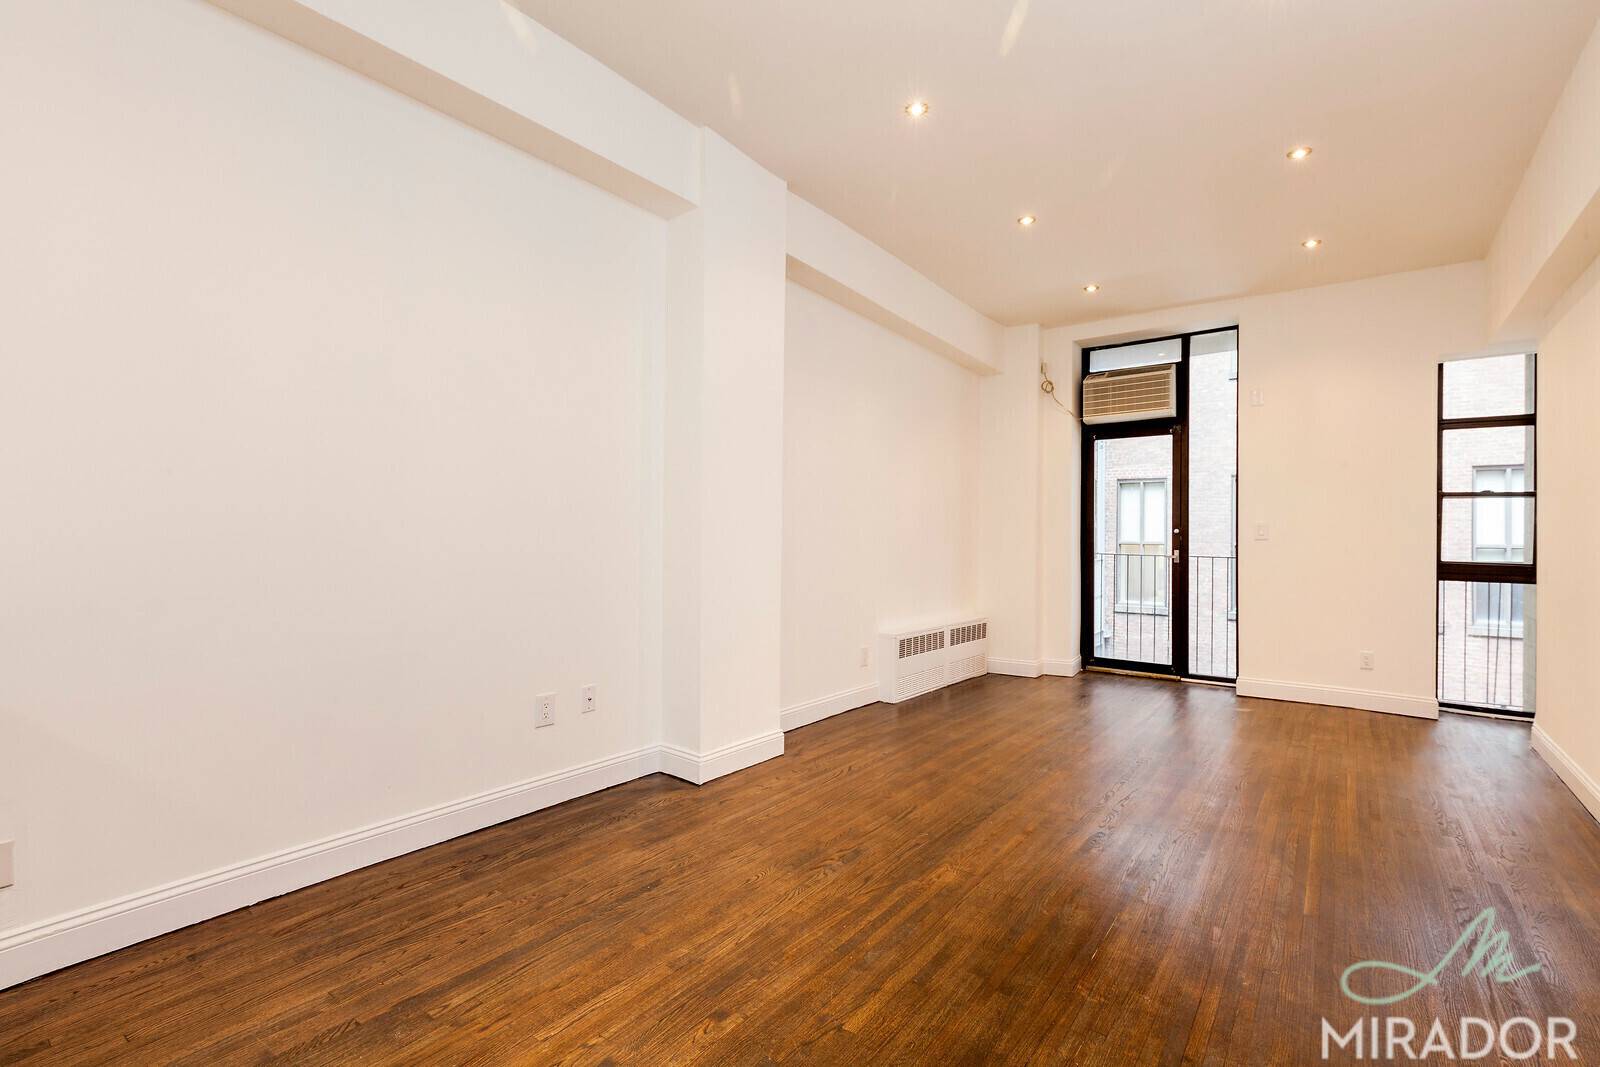 Wonderful new renovated studio just one block from Union Square in a well maintained elevator building.